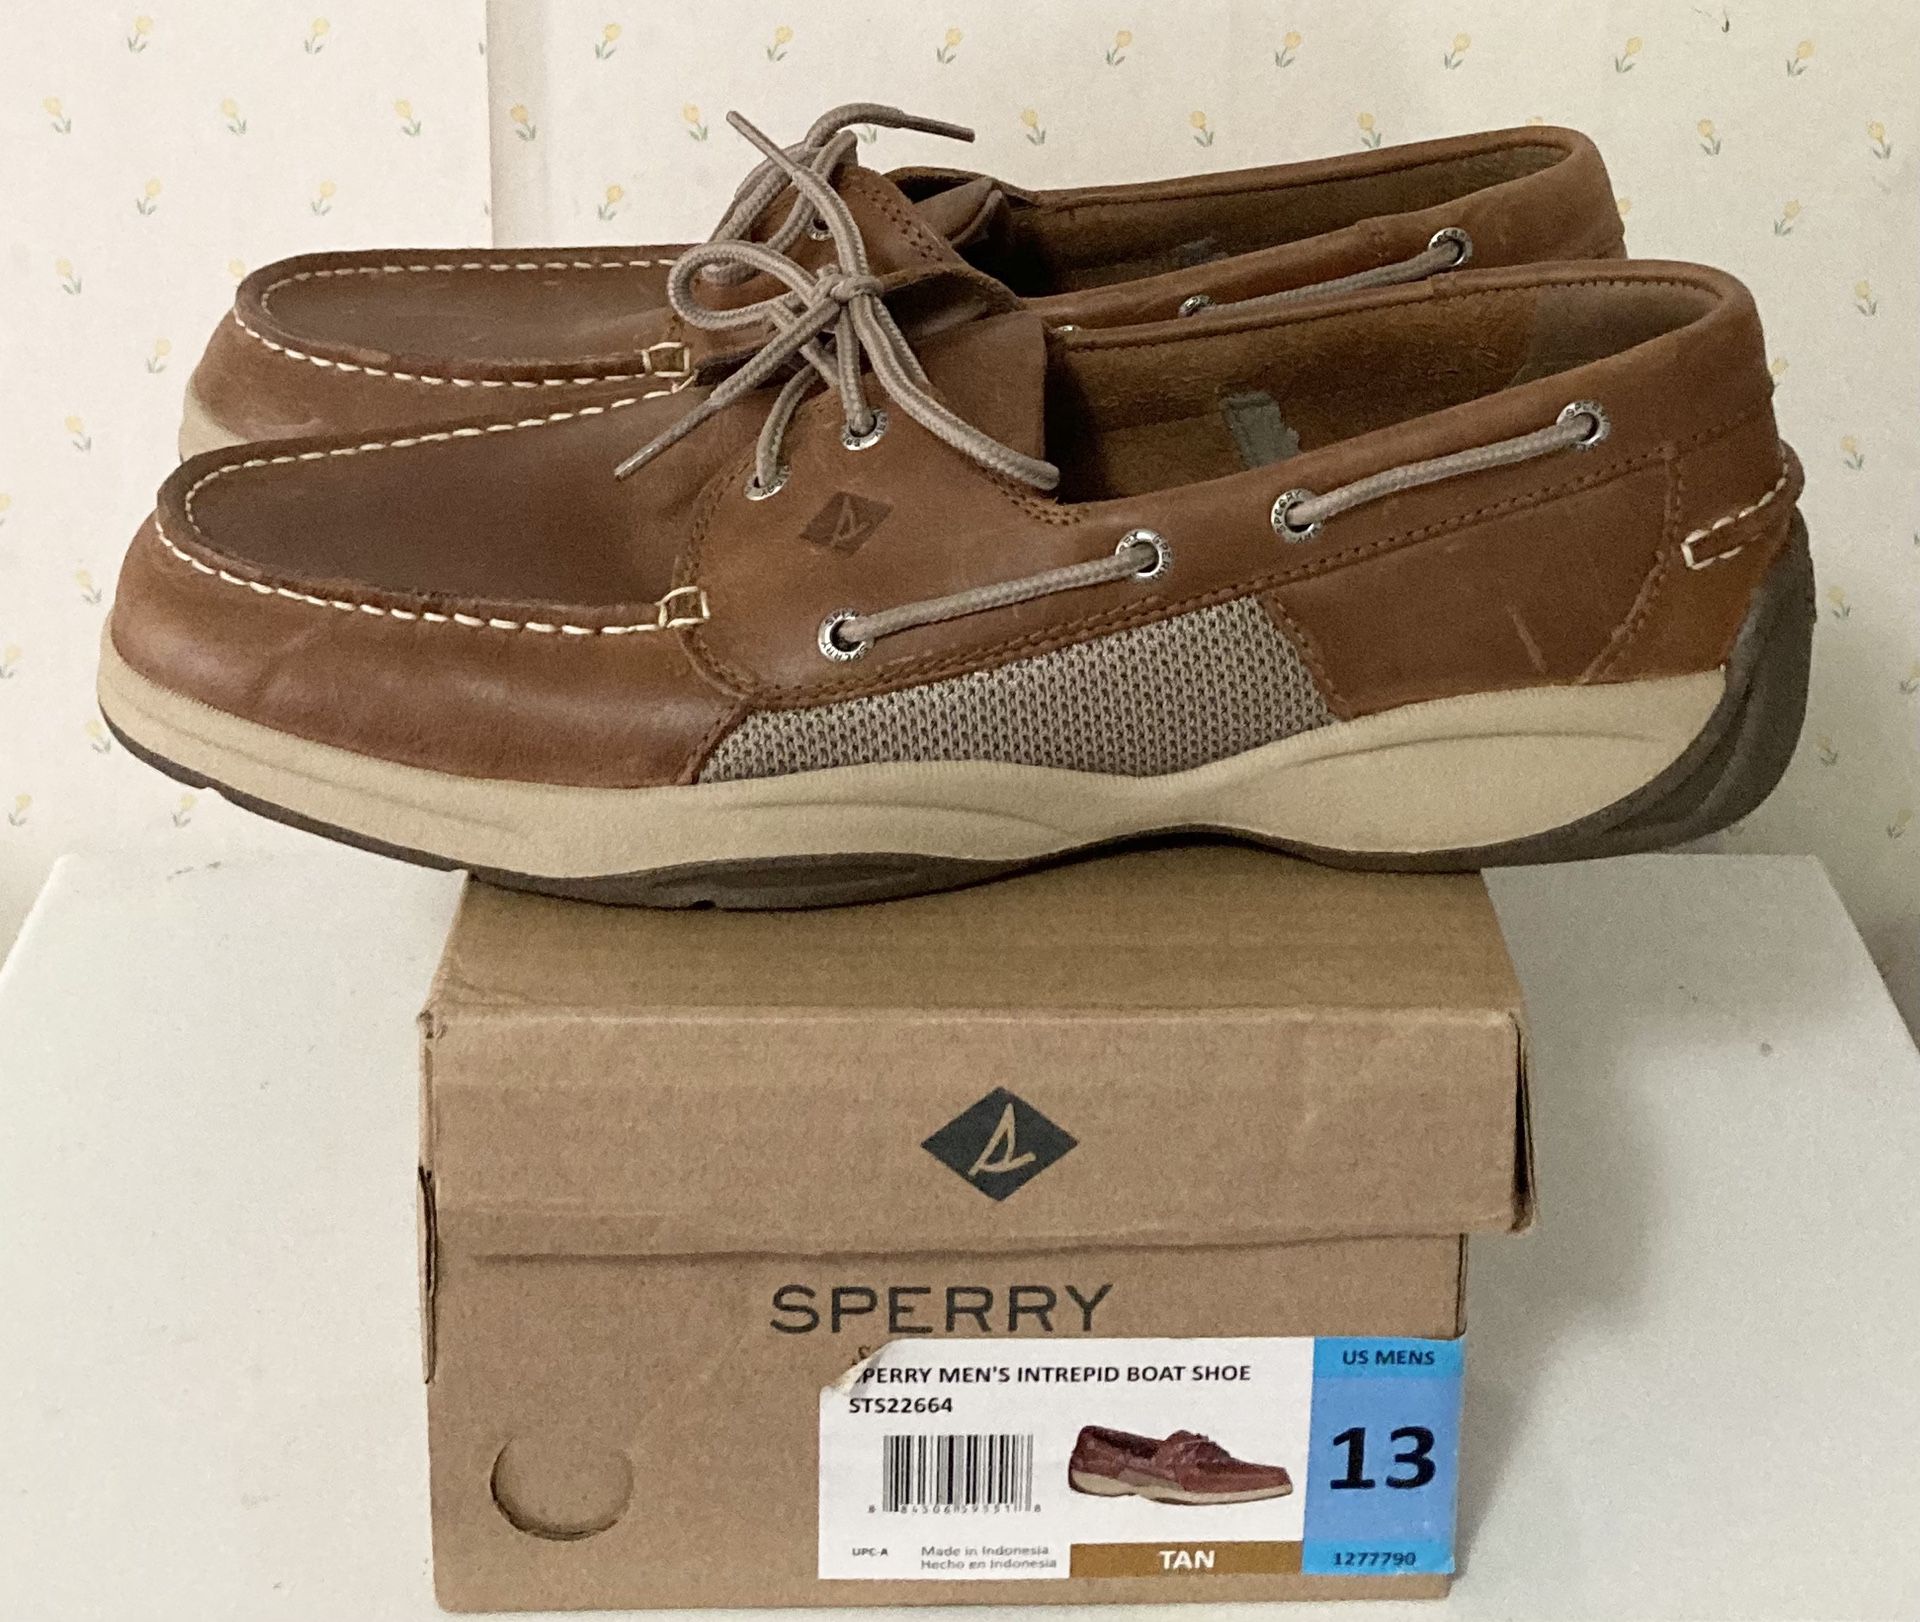 Sperry boat shoes (Men’s size 13)